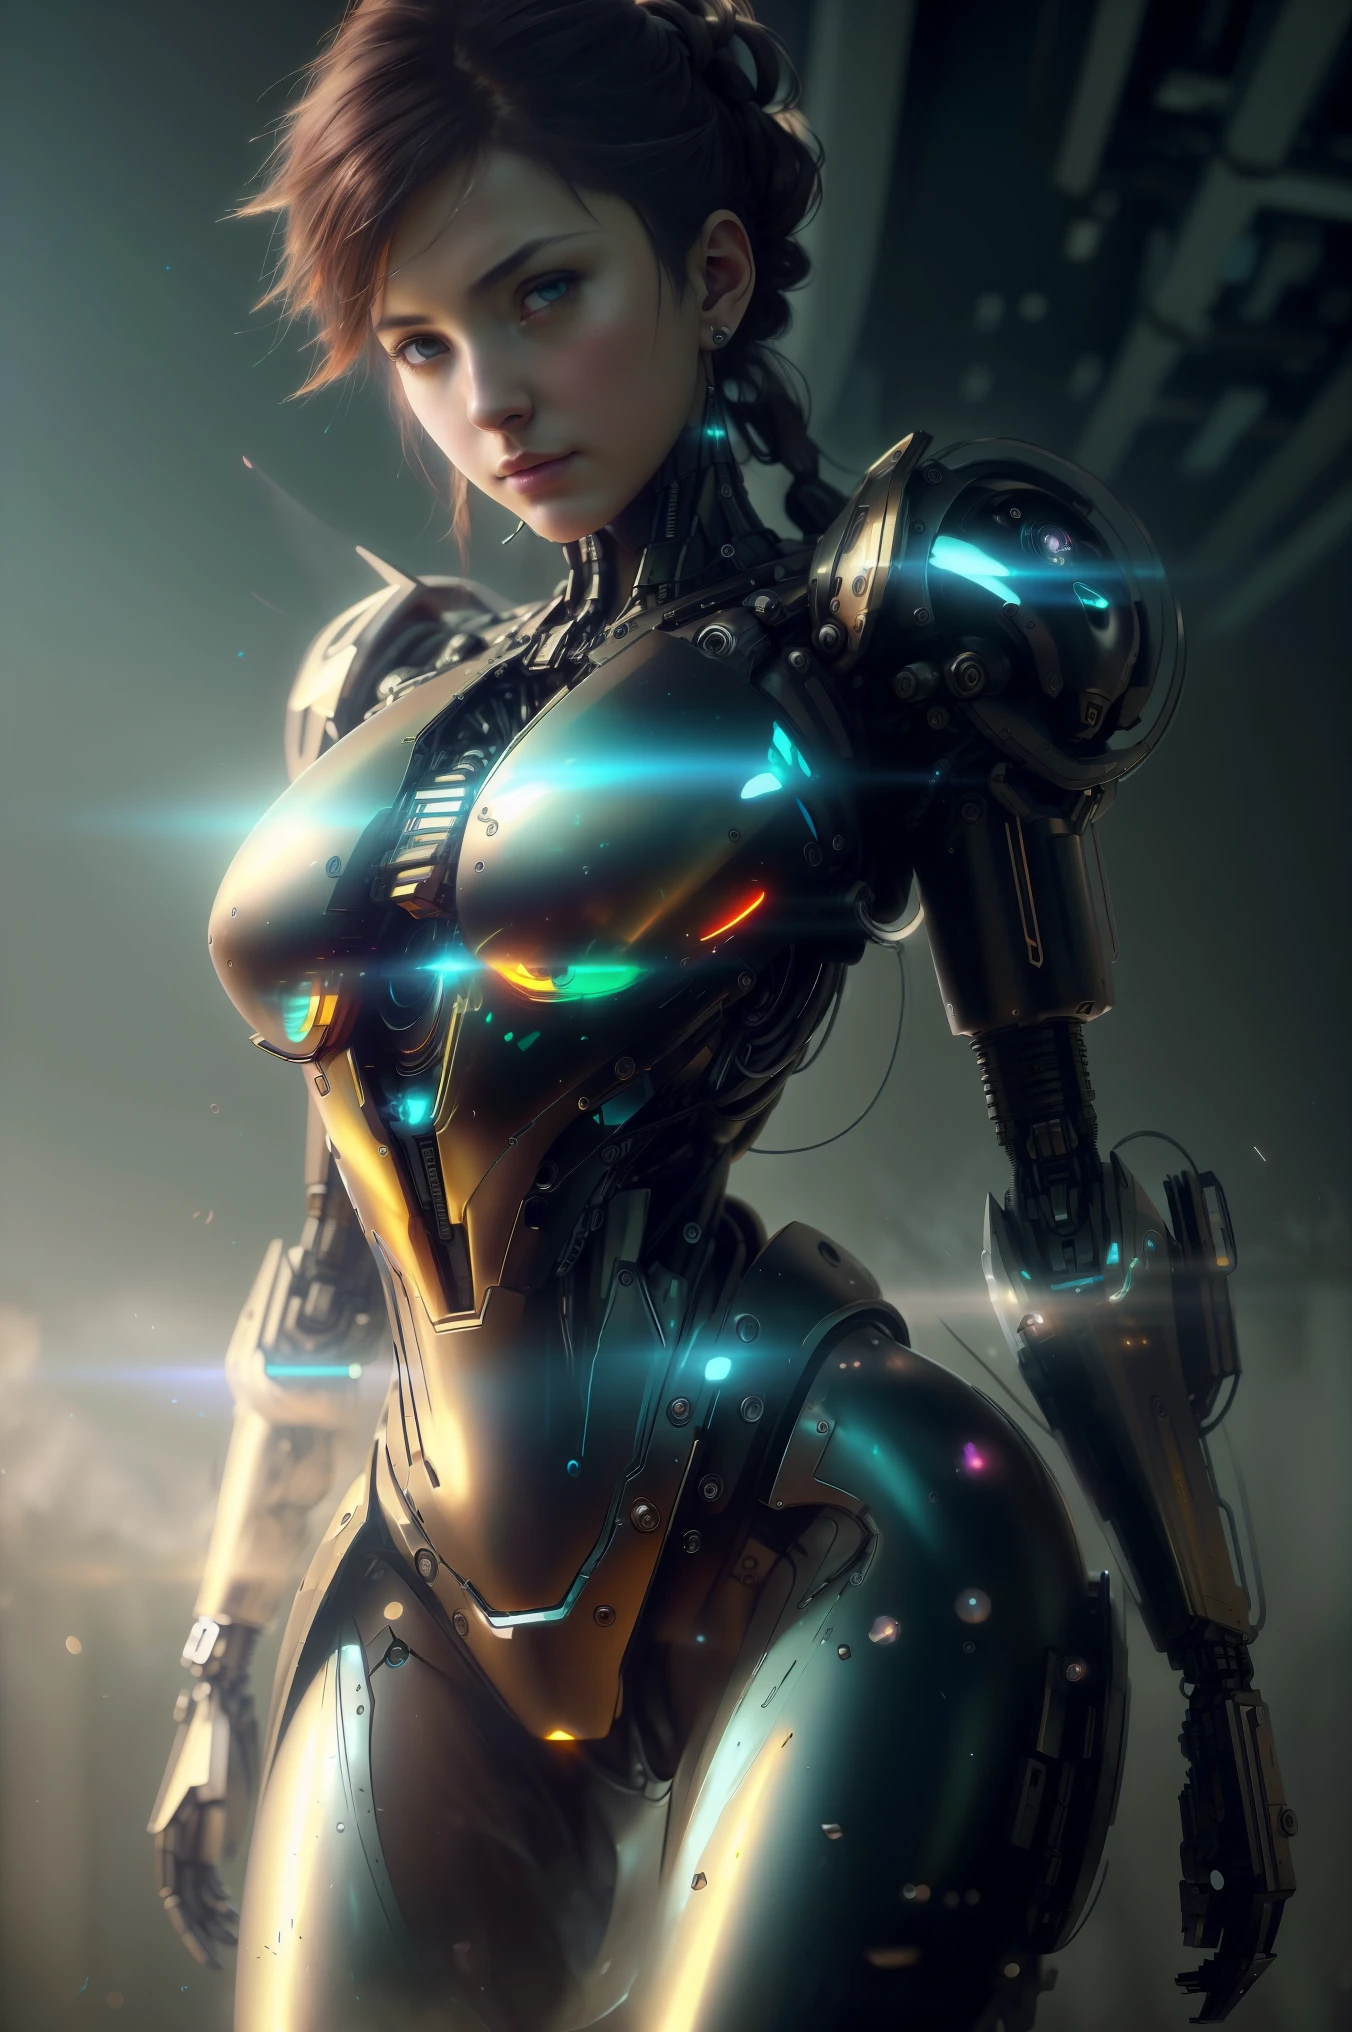 olpntng style, Portrait of the gynoid robot Samus in Wasteland, perfect composition, beautiful detailed intricate insanely detailed octane render Trends on ArtStation, 8k art photography, arte conceitual photorrealistic, soft natural volumetric cinematic perfect light, Bright dark, rewarded photography, work of art, oil on canvas, rafael, caravaggio, Greg Rutkowski, bipe, Beksinski, show, perfect composition, beautiful detailed intricate insanely detailed octane render Trends on ArtStation, 8k art photography, arte conceitual photorrealistic, soft natural volumetric cinematic perfect light, Bright dark, rewarded photography, work of art, oil on canvas, rafael, caravaggio, Greg Rutkowski, bipe, Beksinski, show, Trends on ArtStation, sharp focus, studio photo, details Intricate, highy detailed, Por Greg Rutkowski, neon ambiance, abstract black oil, gear wick, detailed acrylic, grunge, intricate intricacy, rendering in unreal engine, photorrealistic, oil painting, Heavy strokes, dripping paint